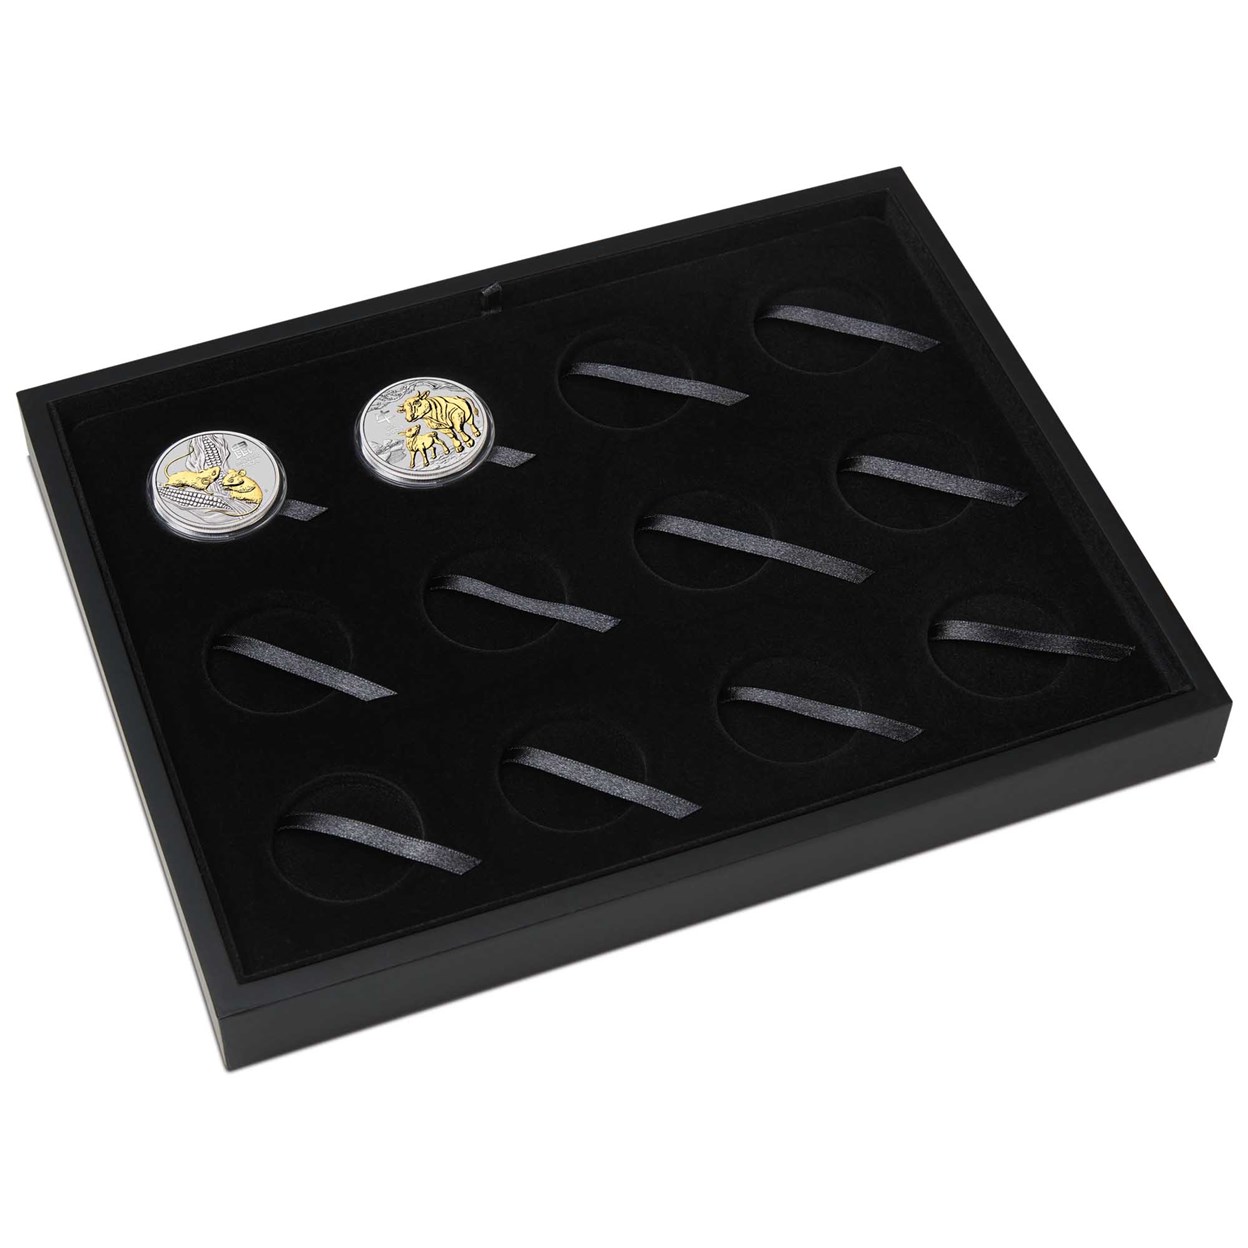 04 Lunar Box with 1oz Silver Gilded Ox Coin HighRes